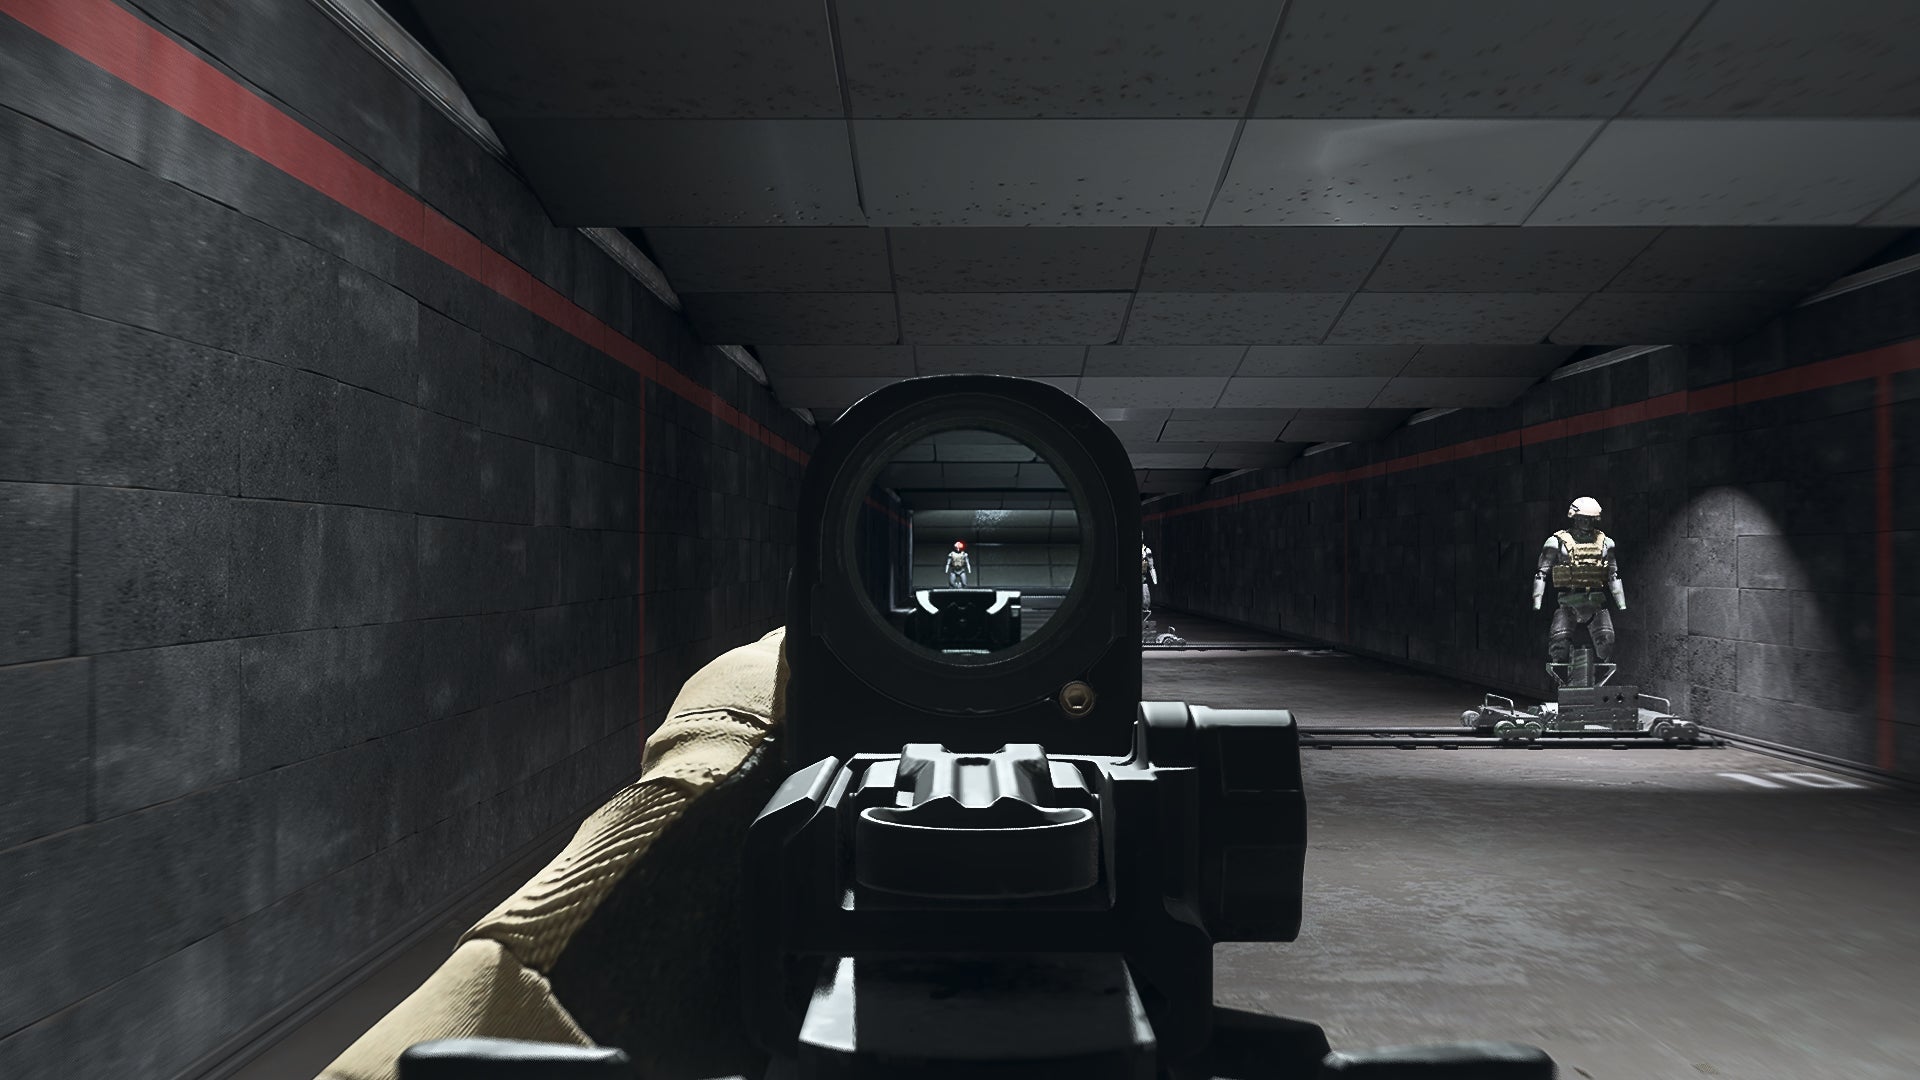 The player in Warzone 2.0 aims at a training dummy using the Corvus Sol 76 optic attachment.